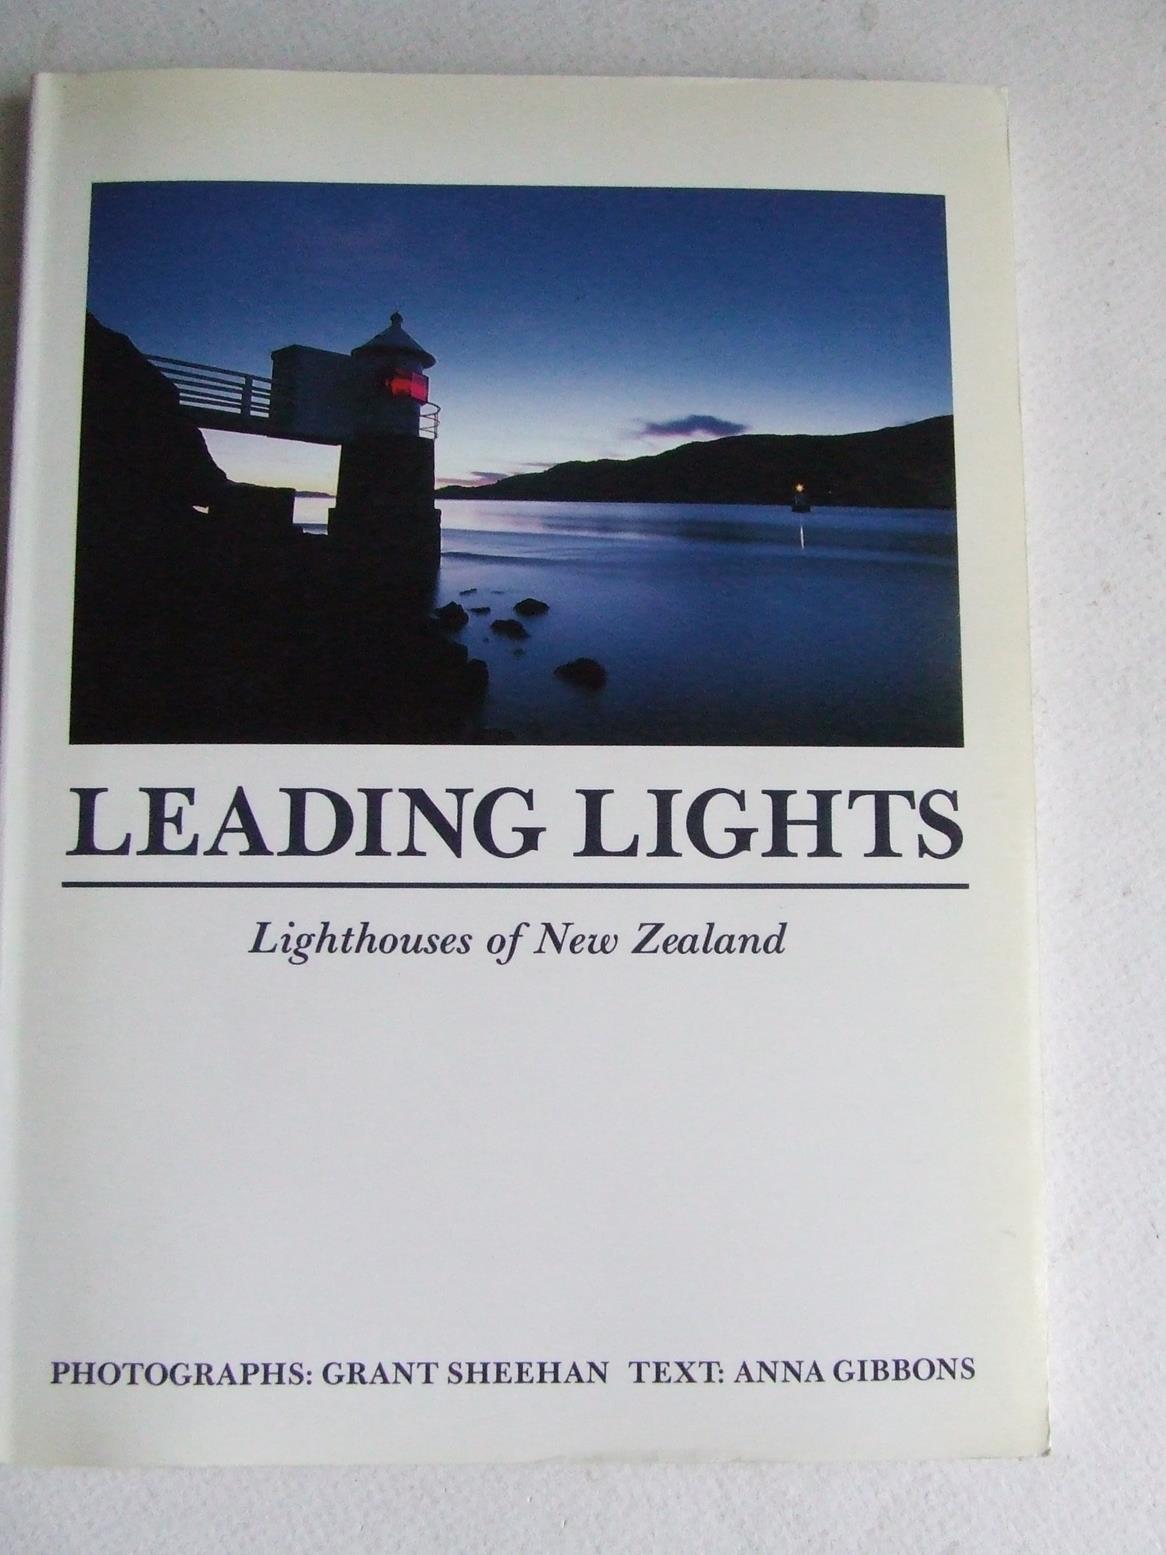 Leading Lights, lighthouses of New Zealand